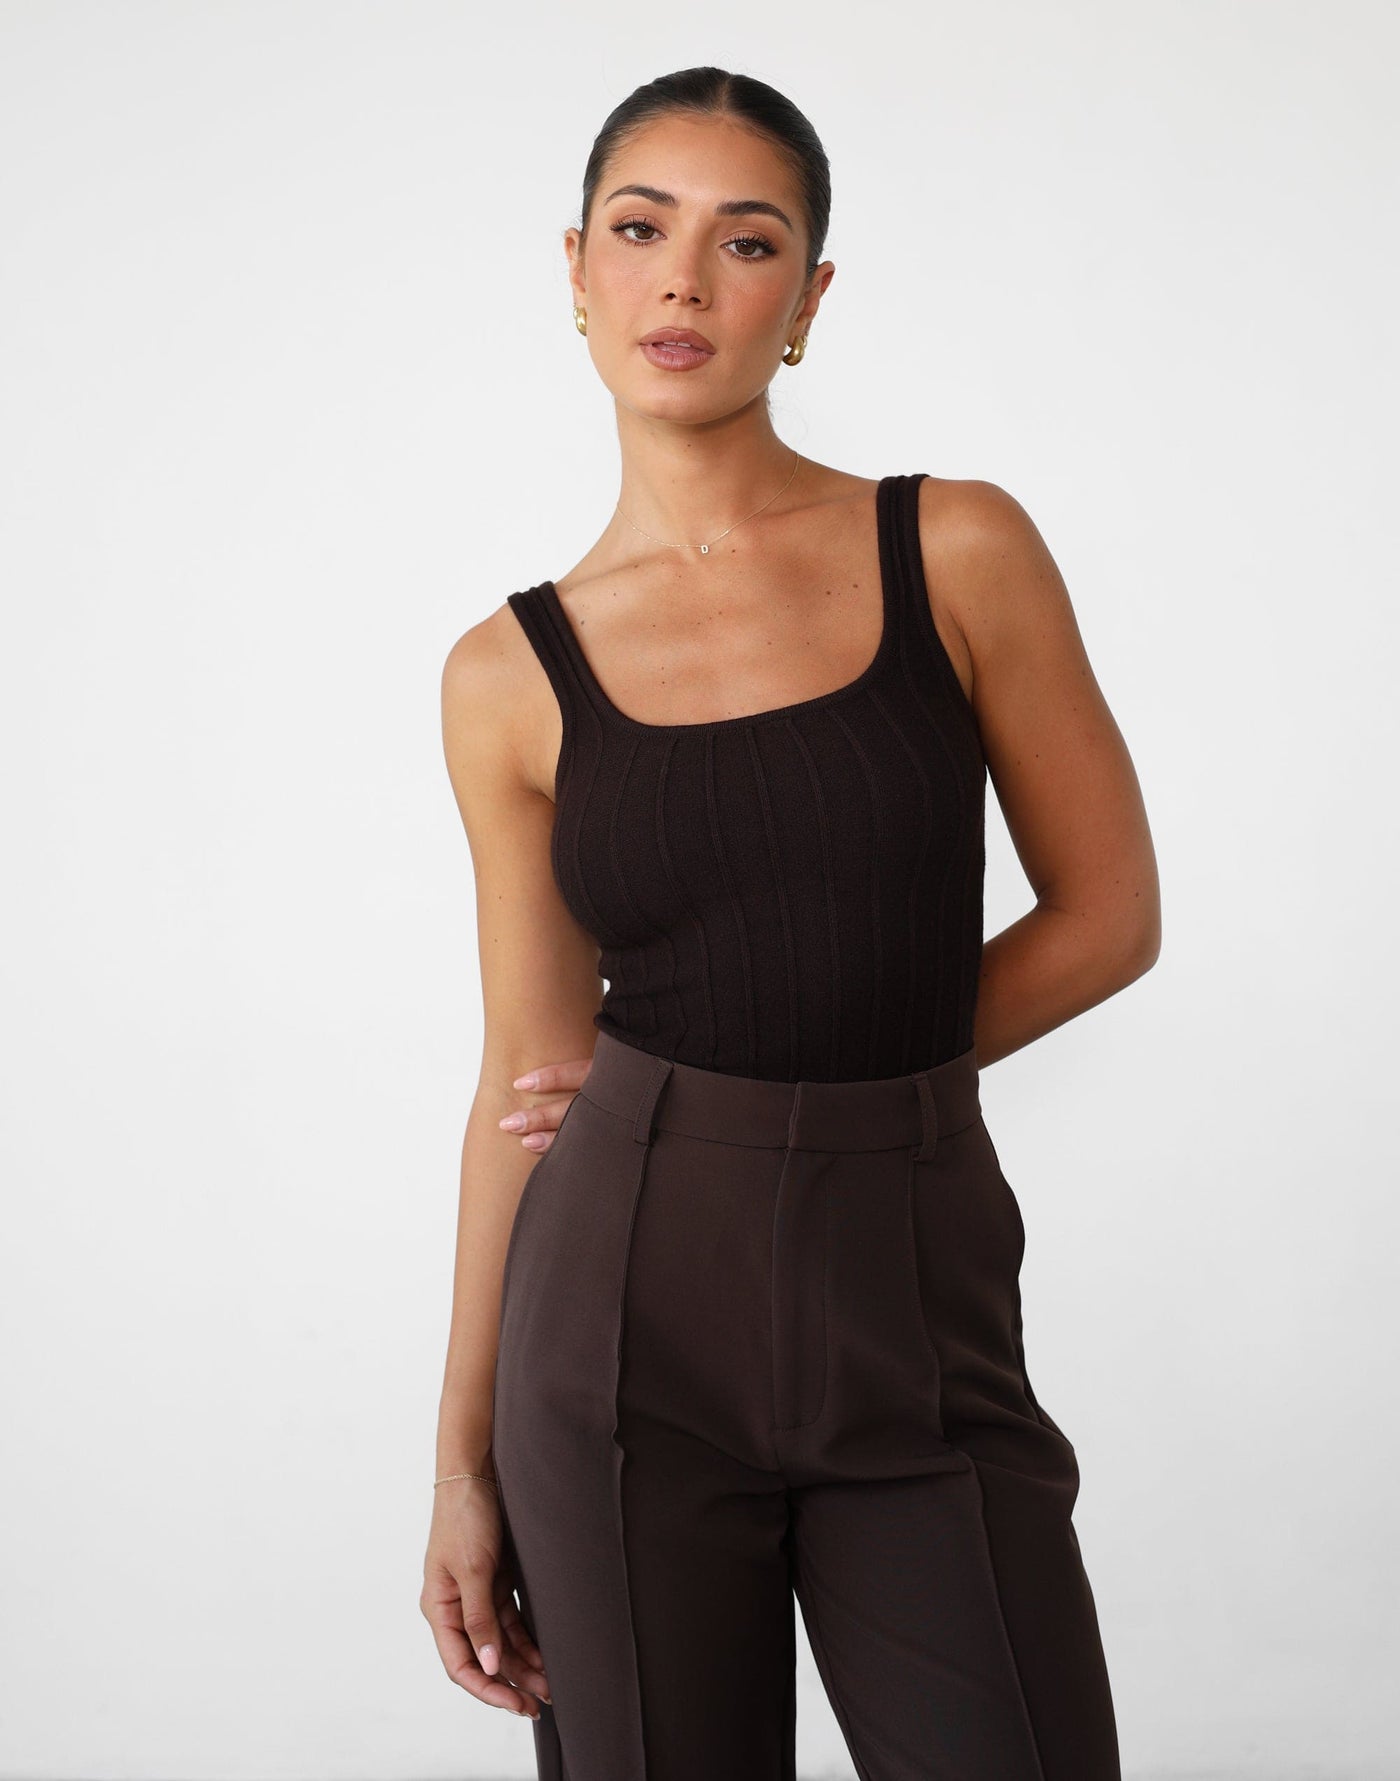 Ephemeral Top (Chocolate) - Scoop Neck Ribbed Knit Top - Women's Top - Charcoal Clothing